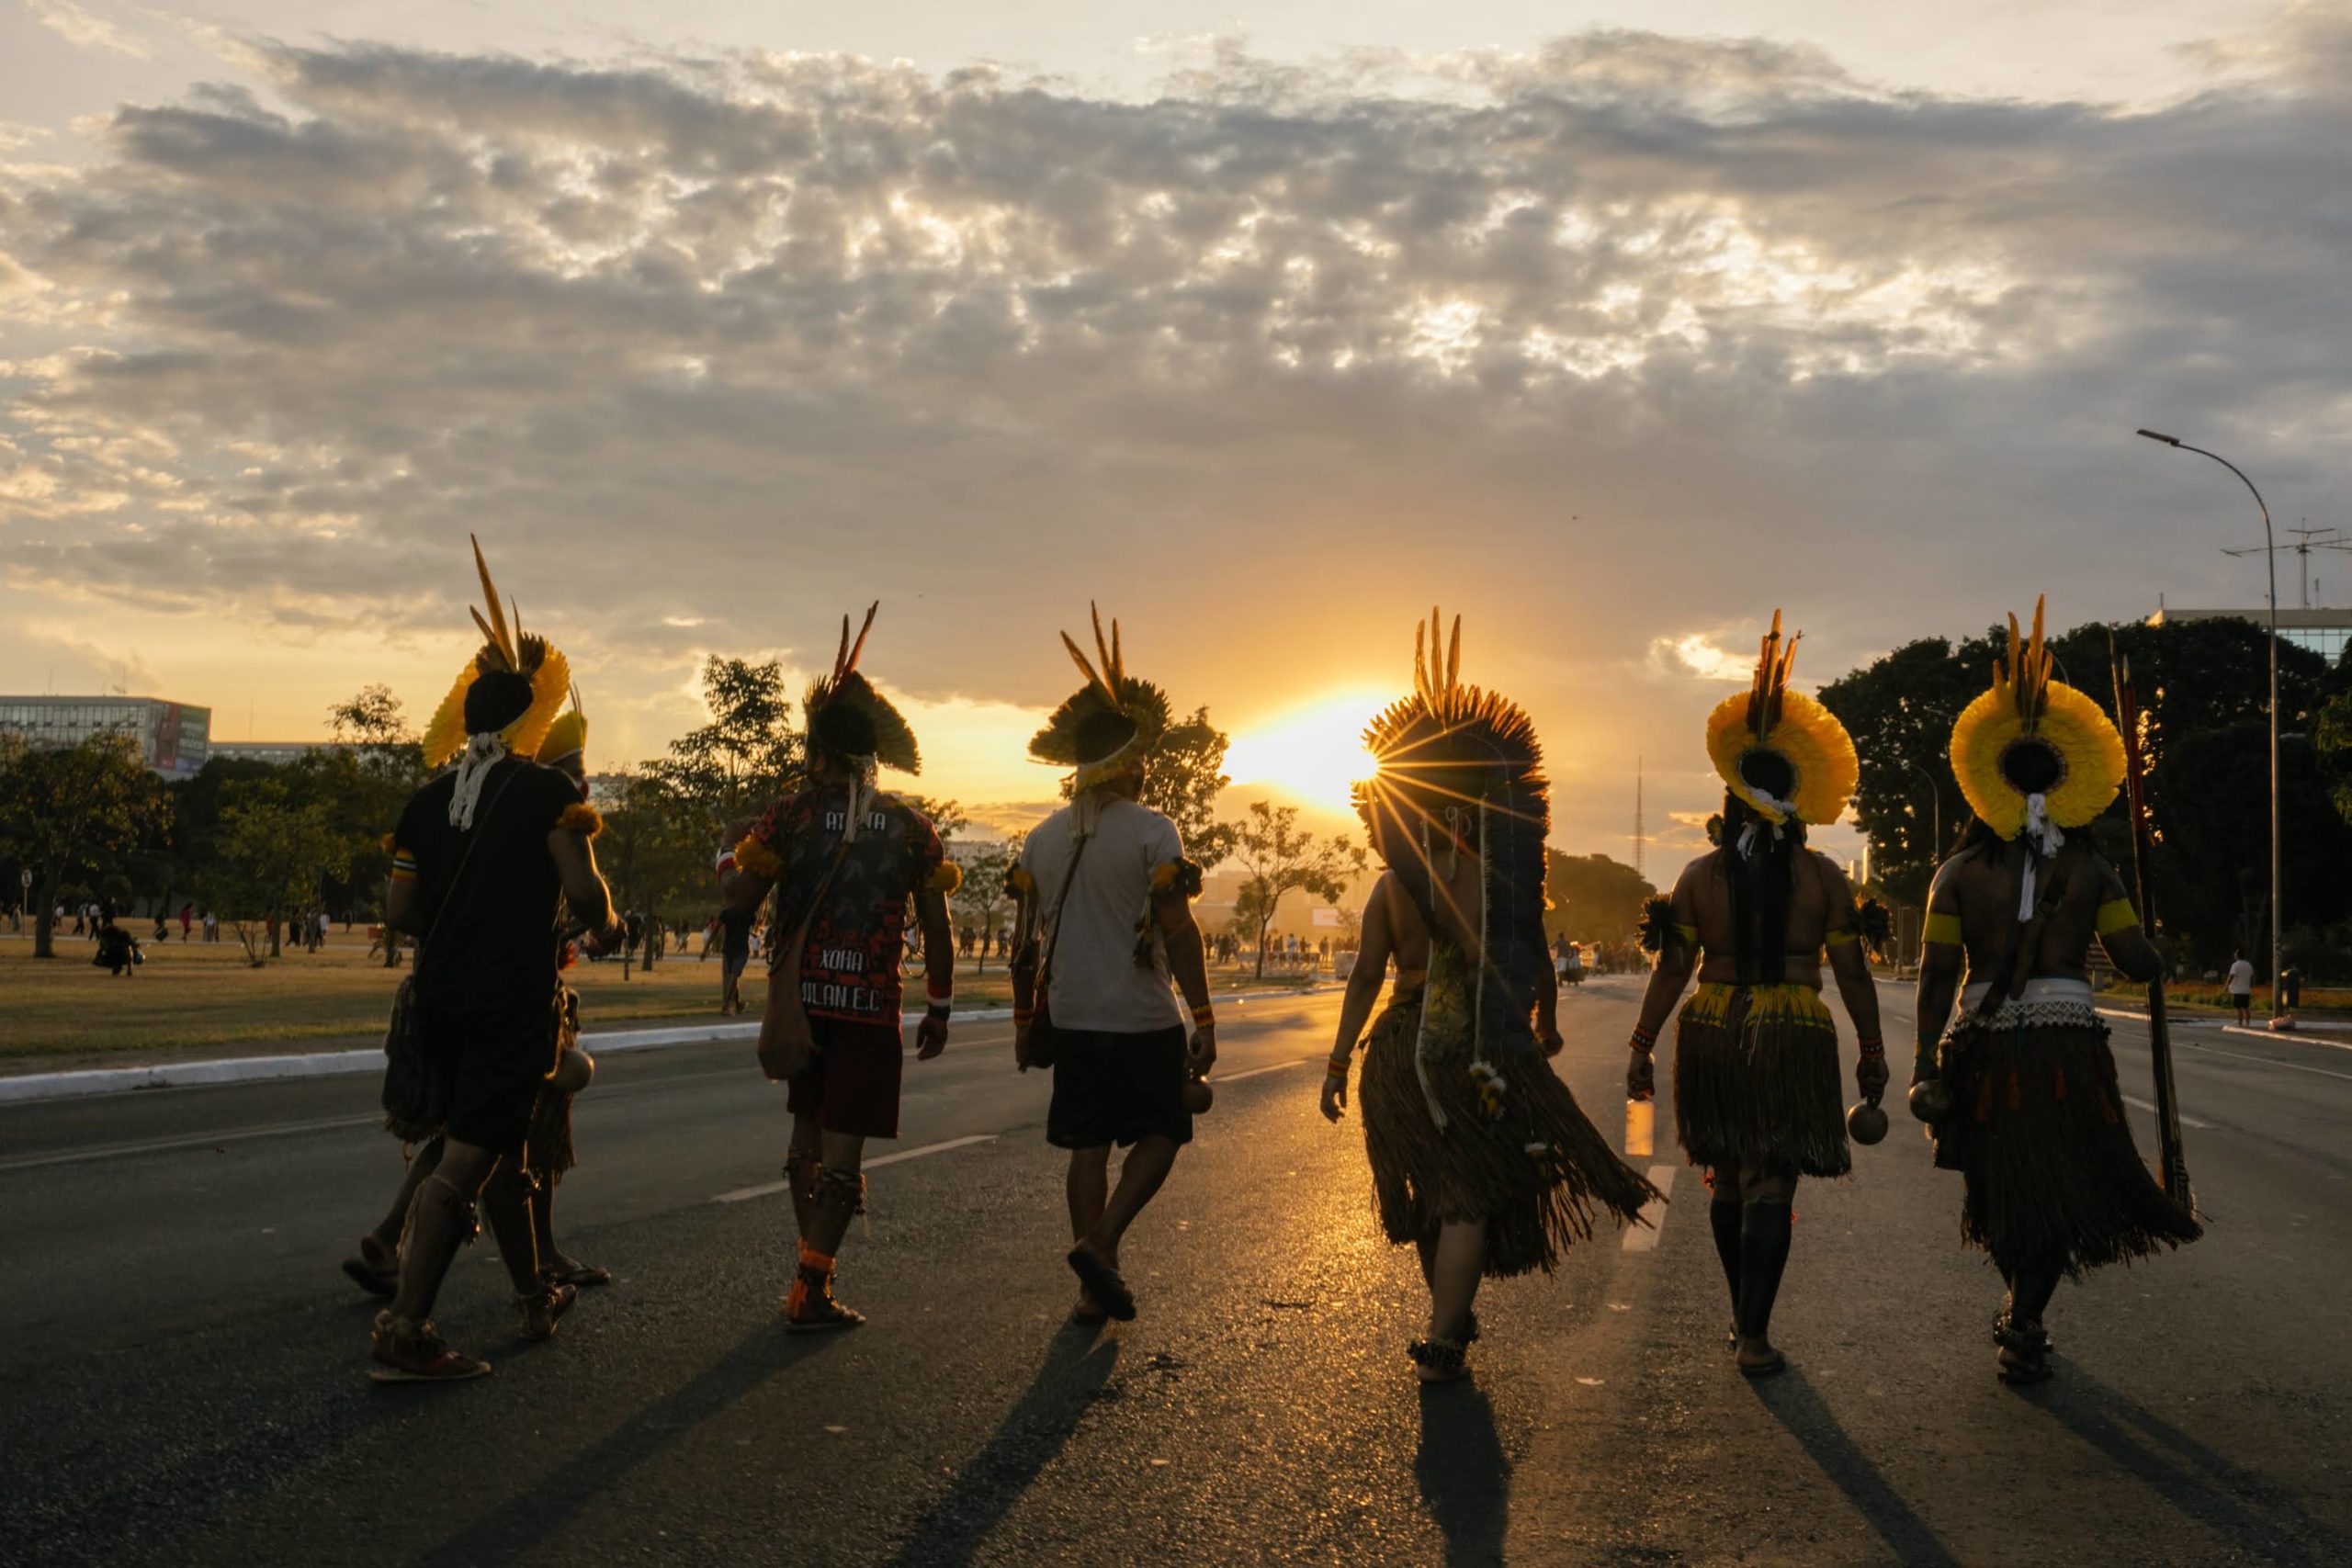 men in native costumes viewed from behind as they walk on a paved street toward the setting sun